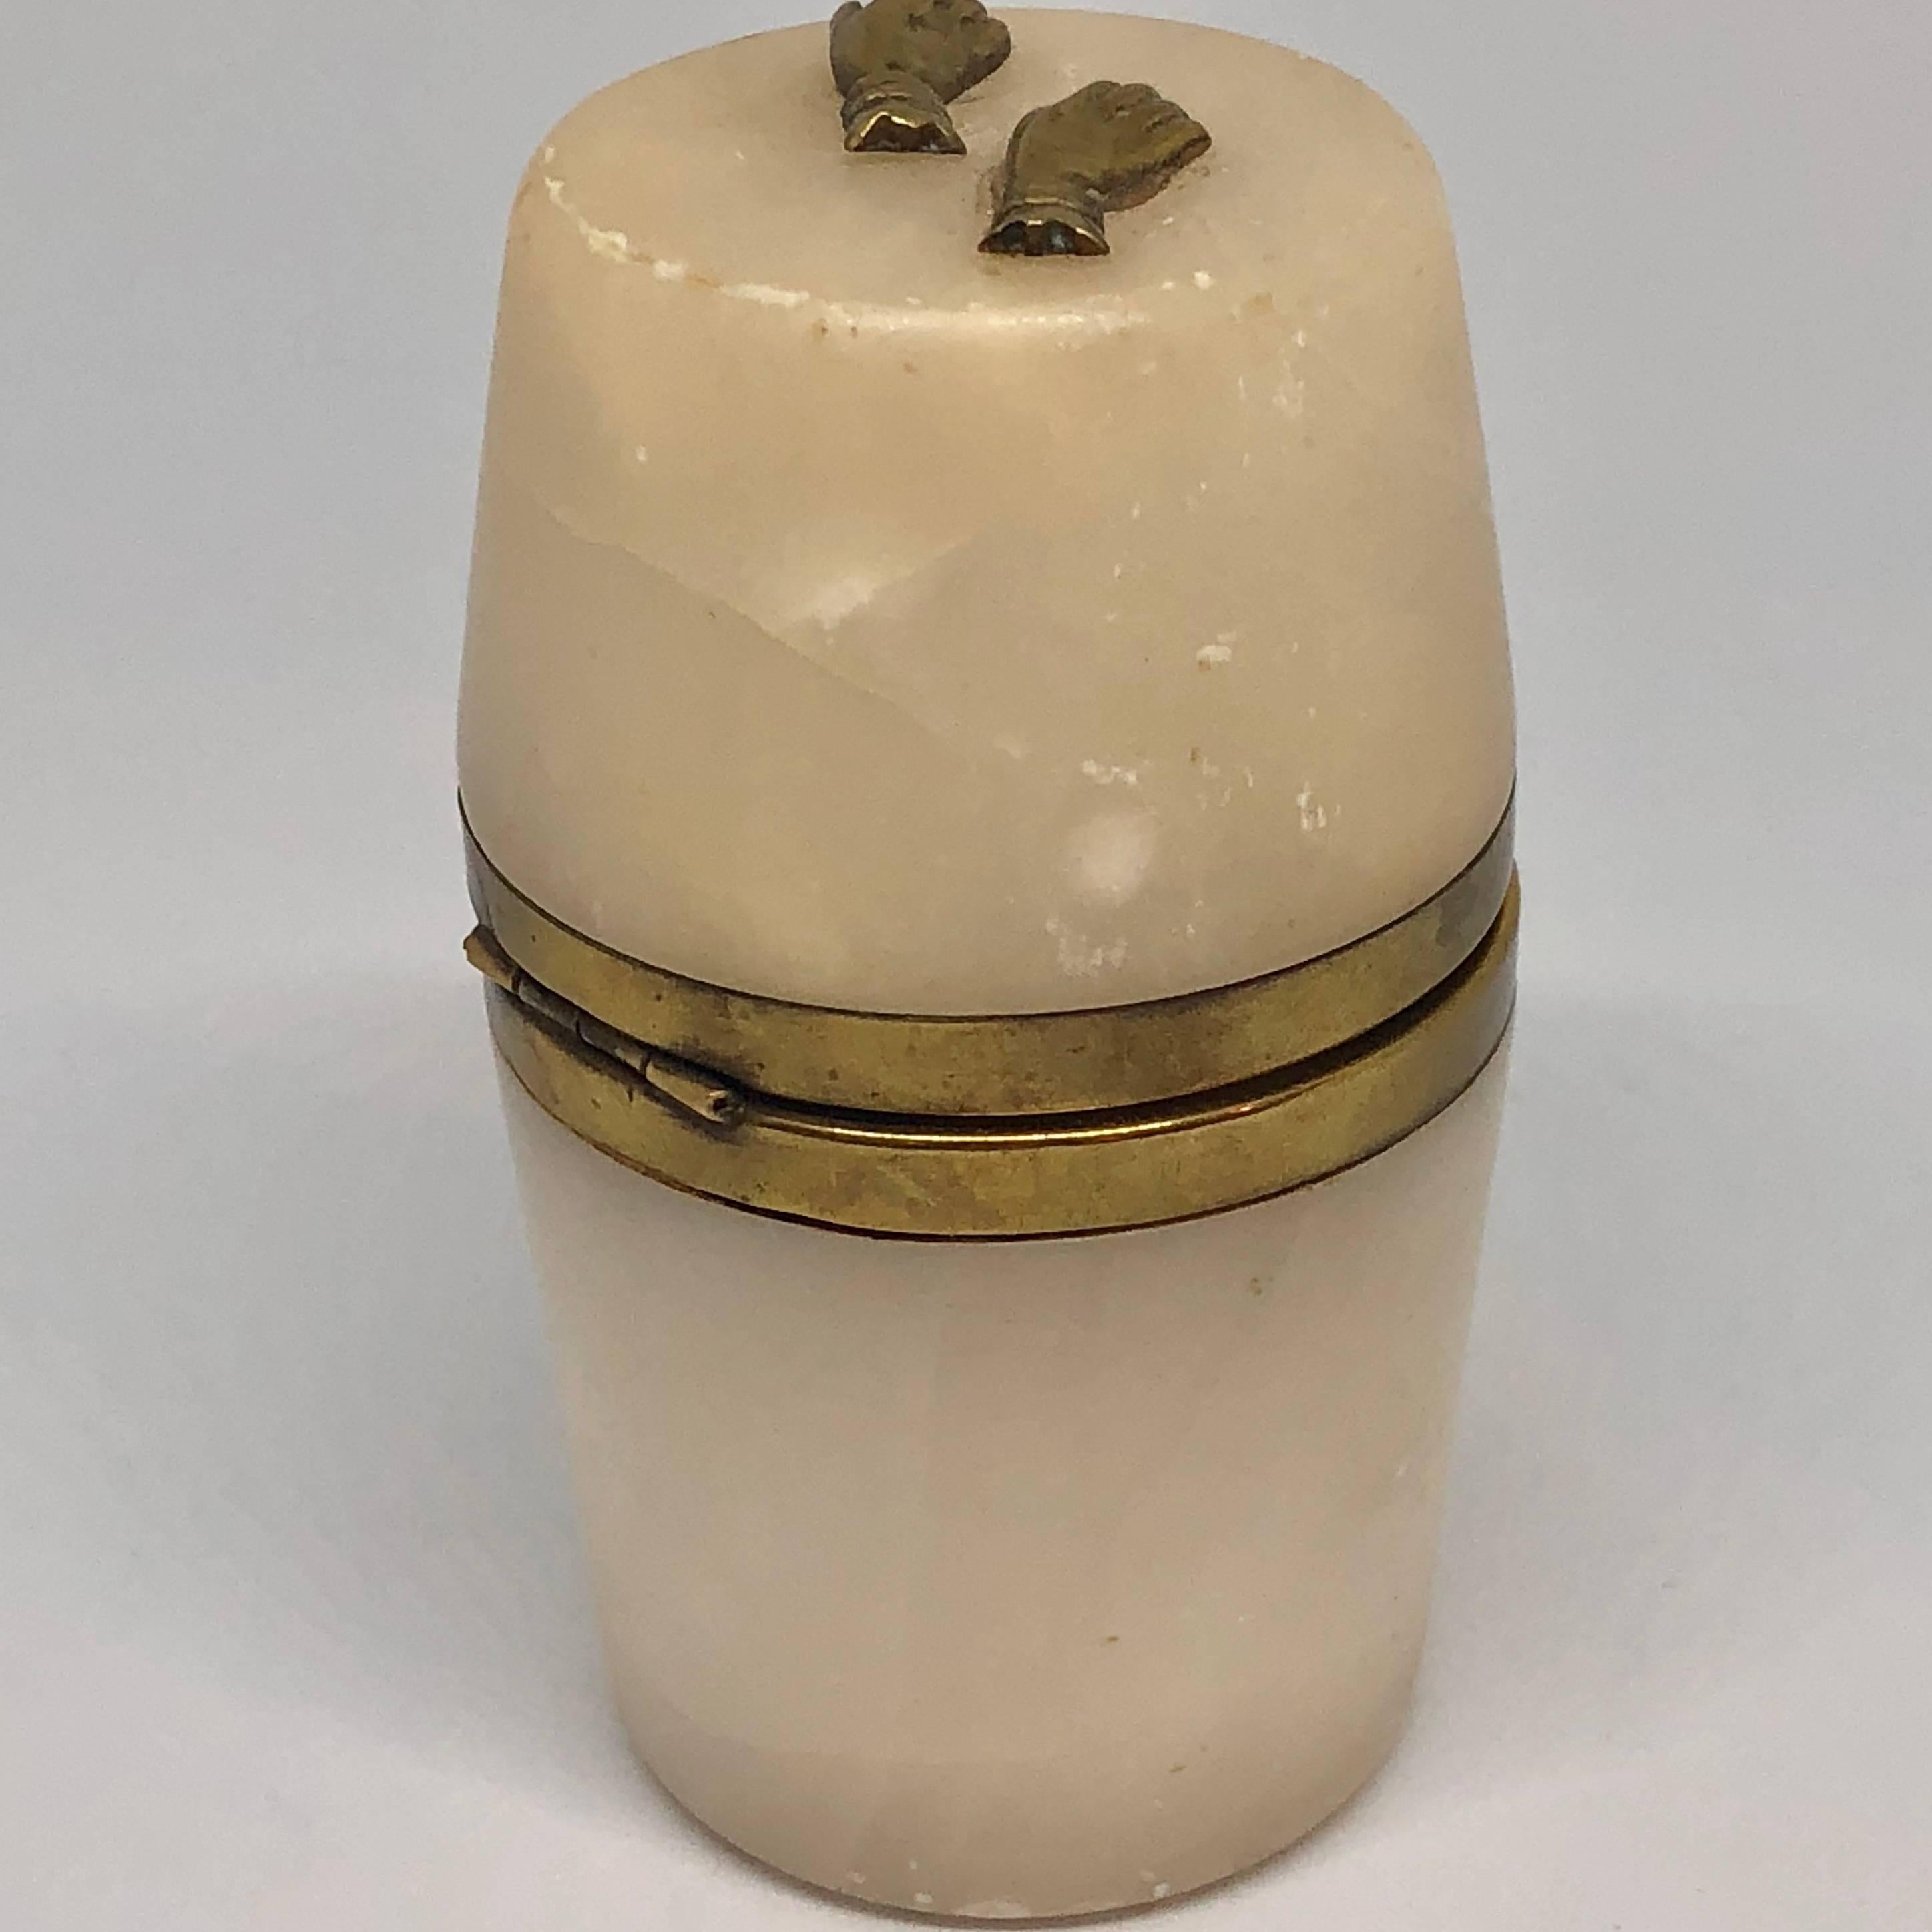 Small 18th Century Alabaster Barrel Shaped Jewelry Box W/ Brass Hands Decor In Good Condition For Sale In Haddonfield, NJ